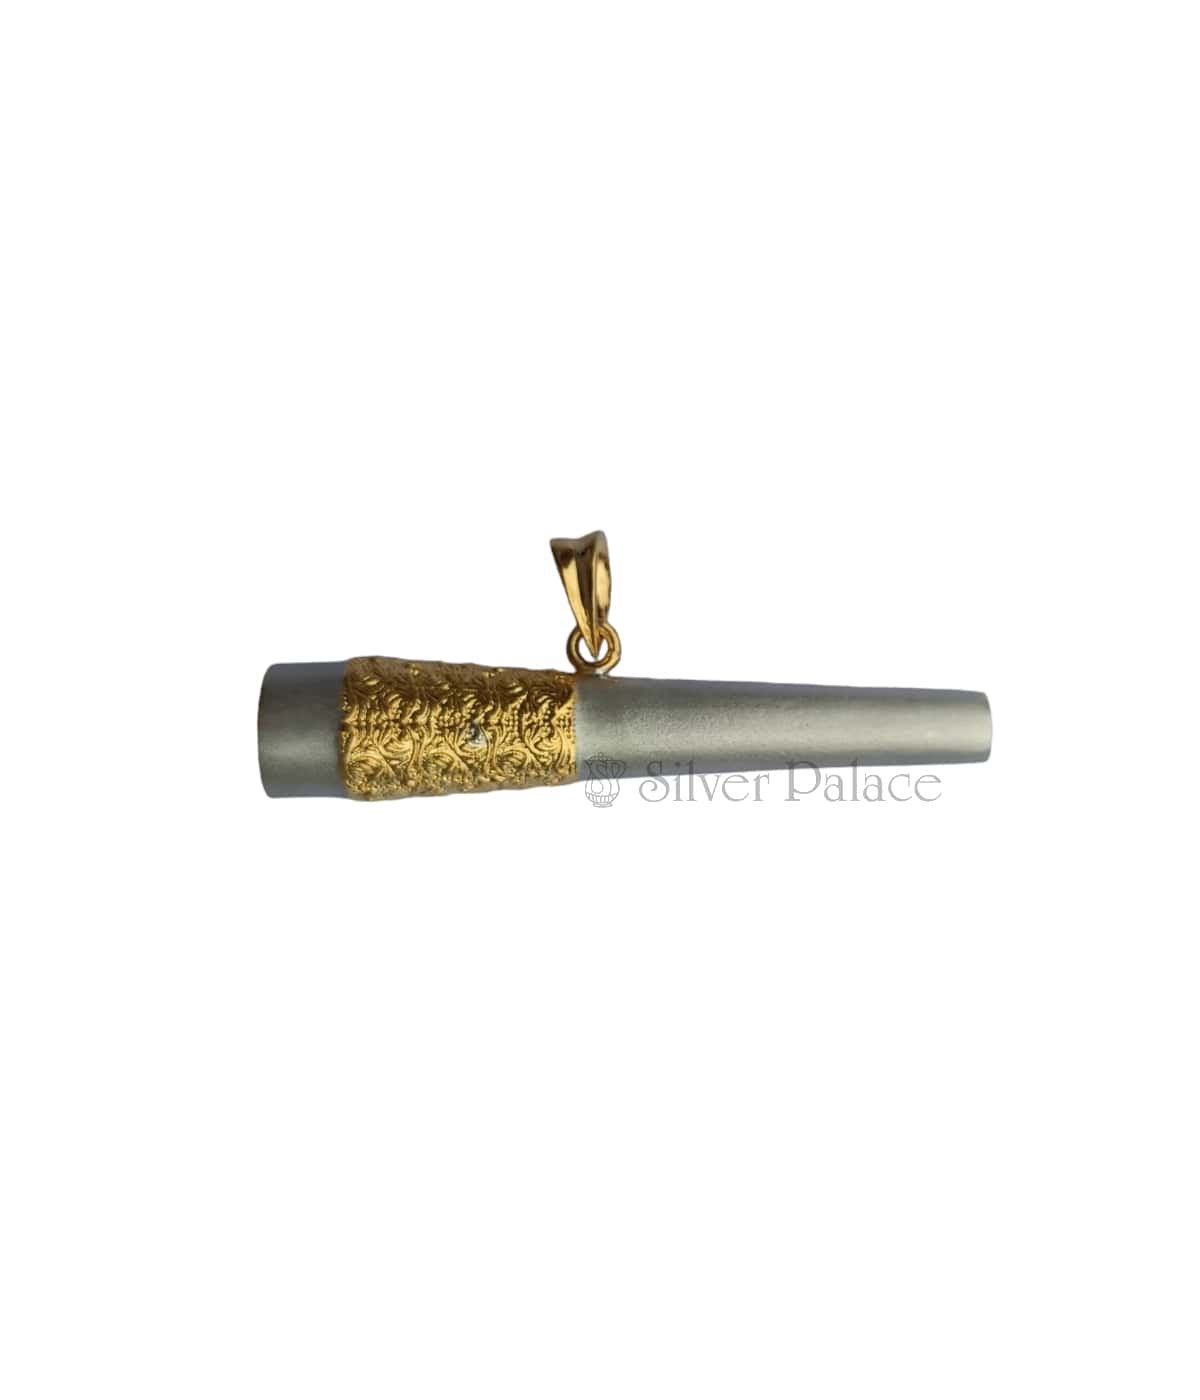 92.5 STERLING SILVER GOLD SILVER PLATED FILTER MOUTHPIECE PENDANT